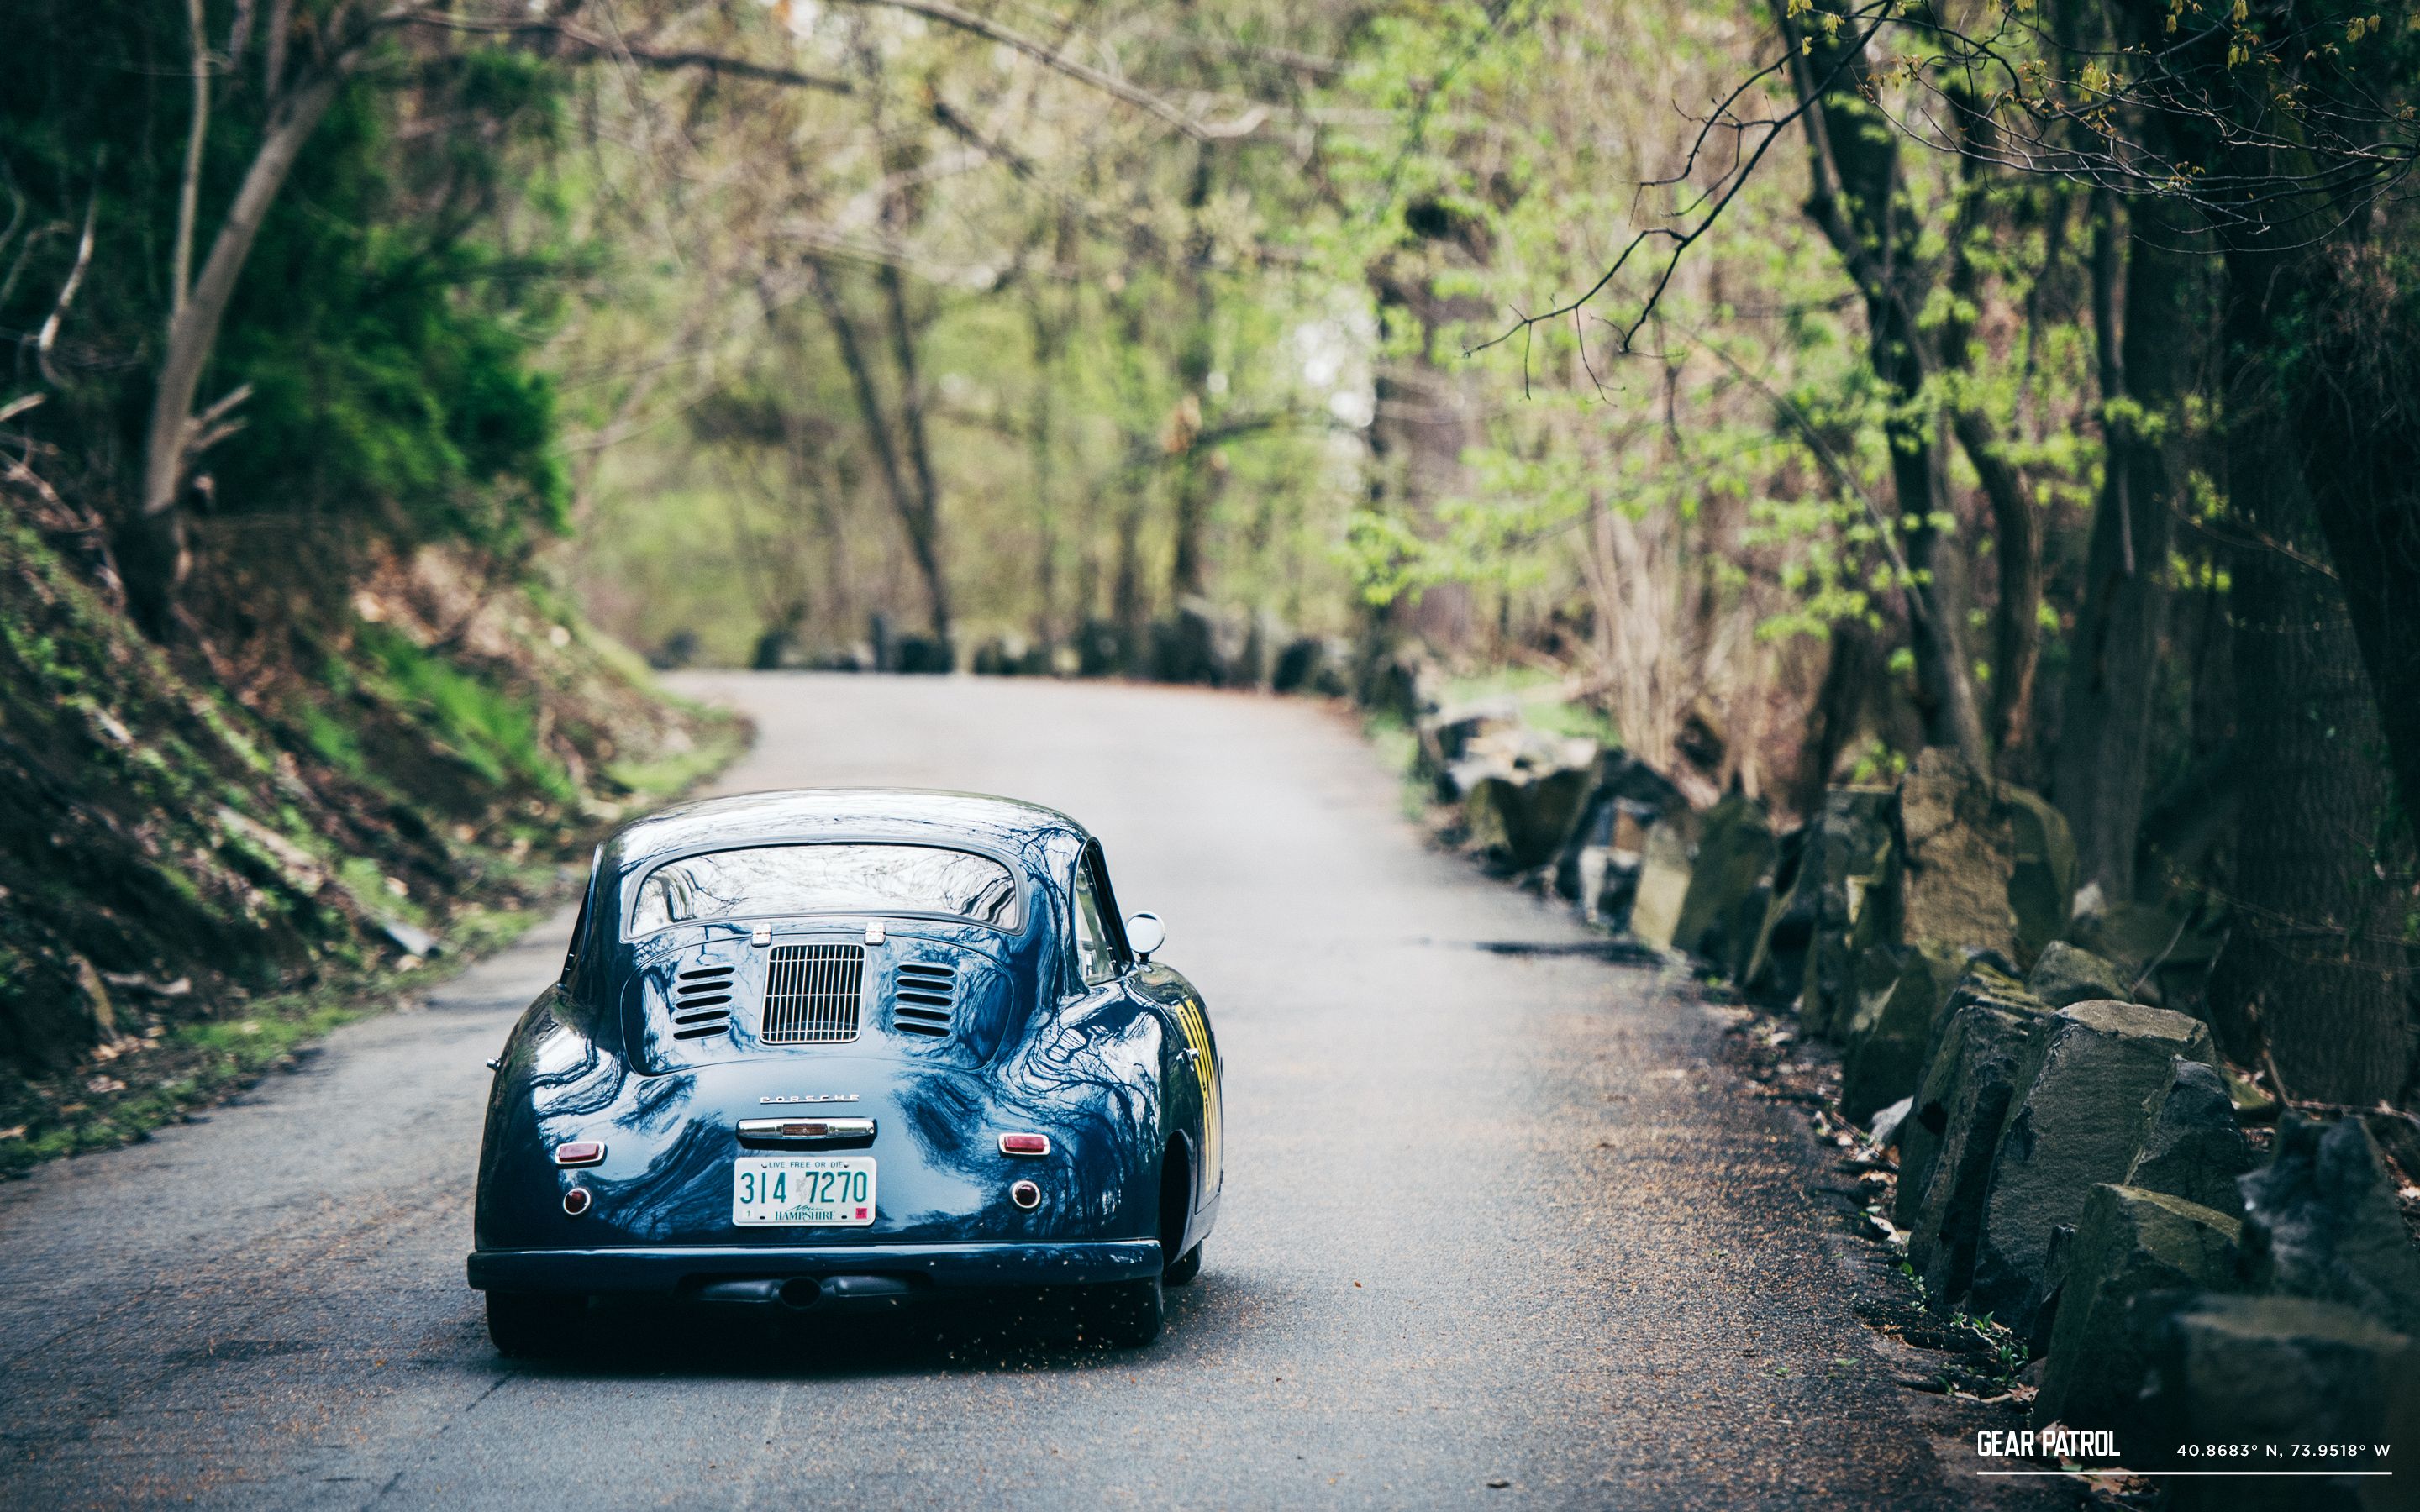 Do Yourself a Favor and Download This Vintage Porsche Wallpaper